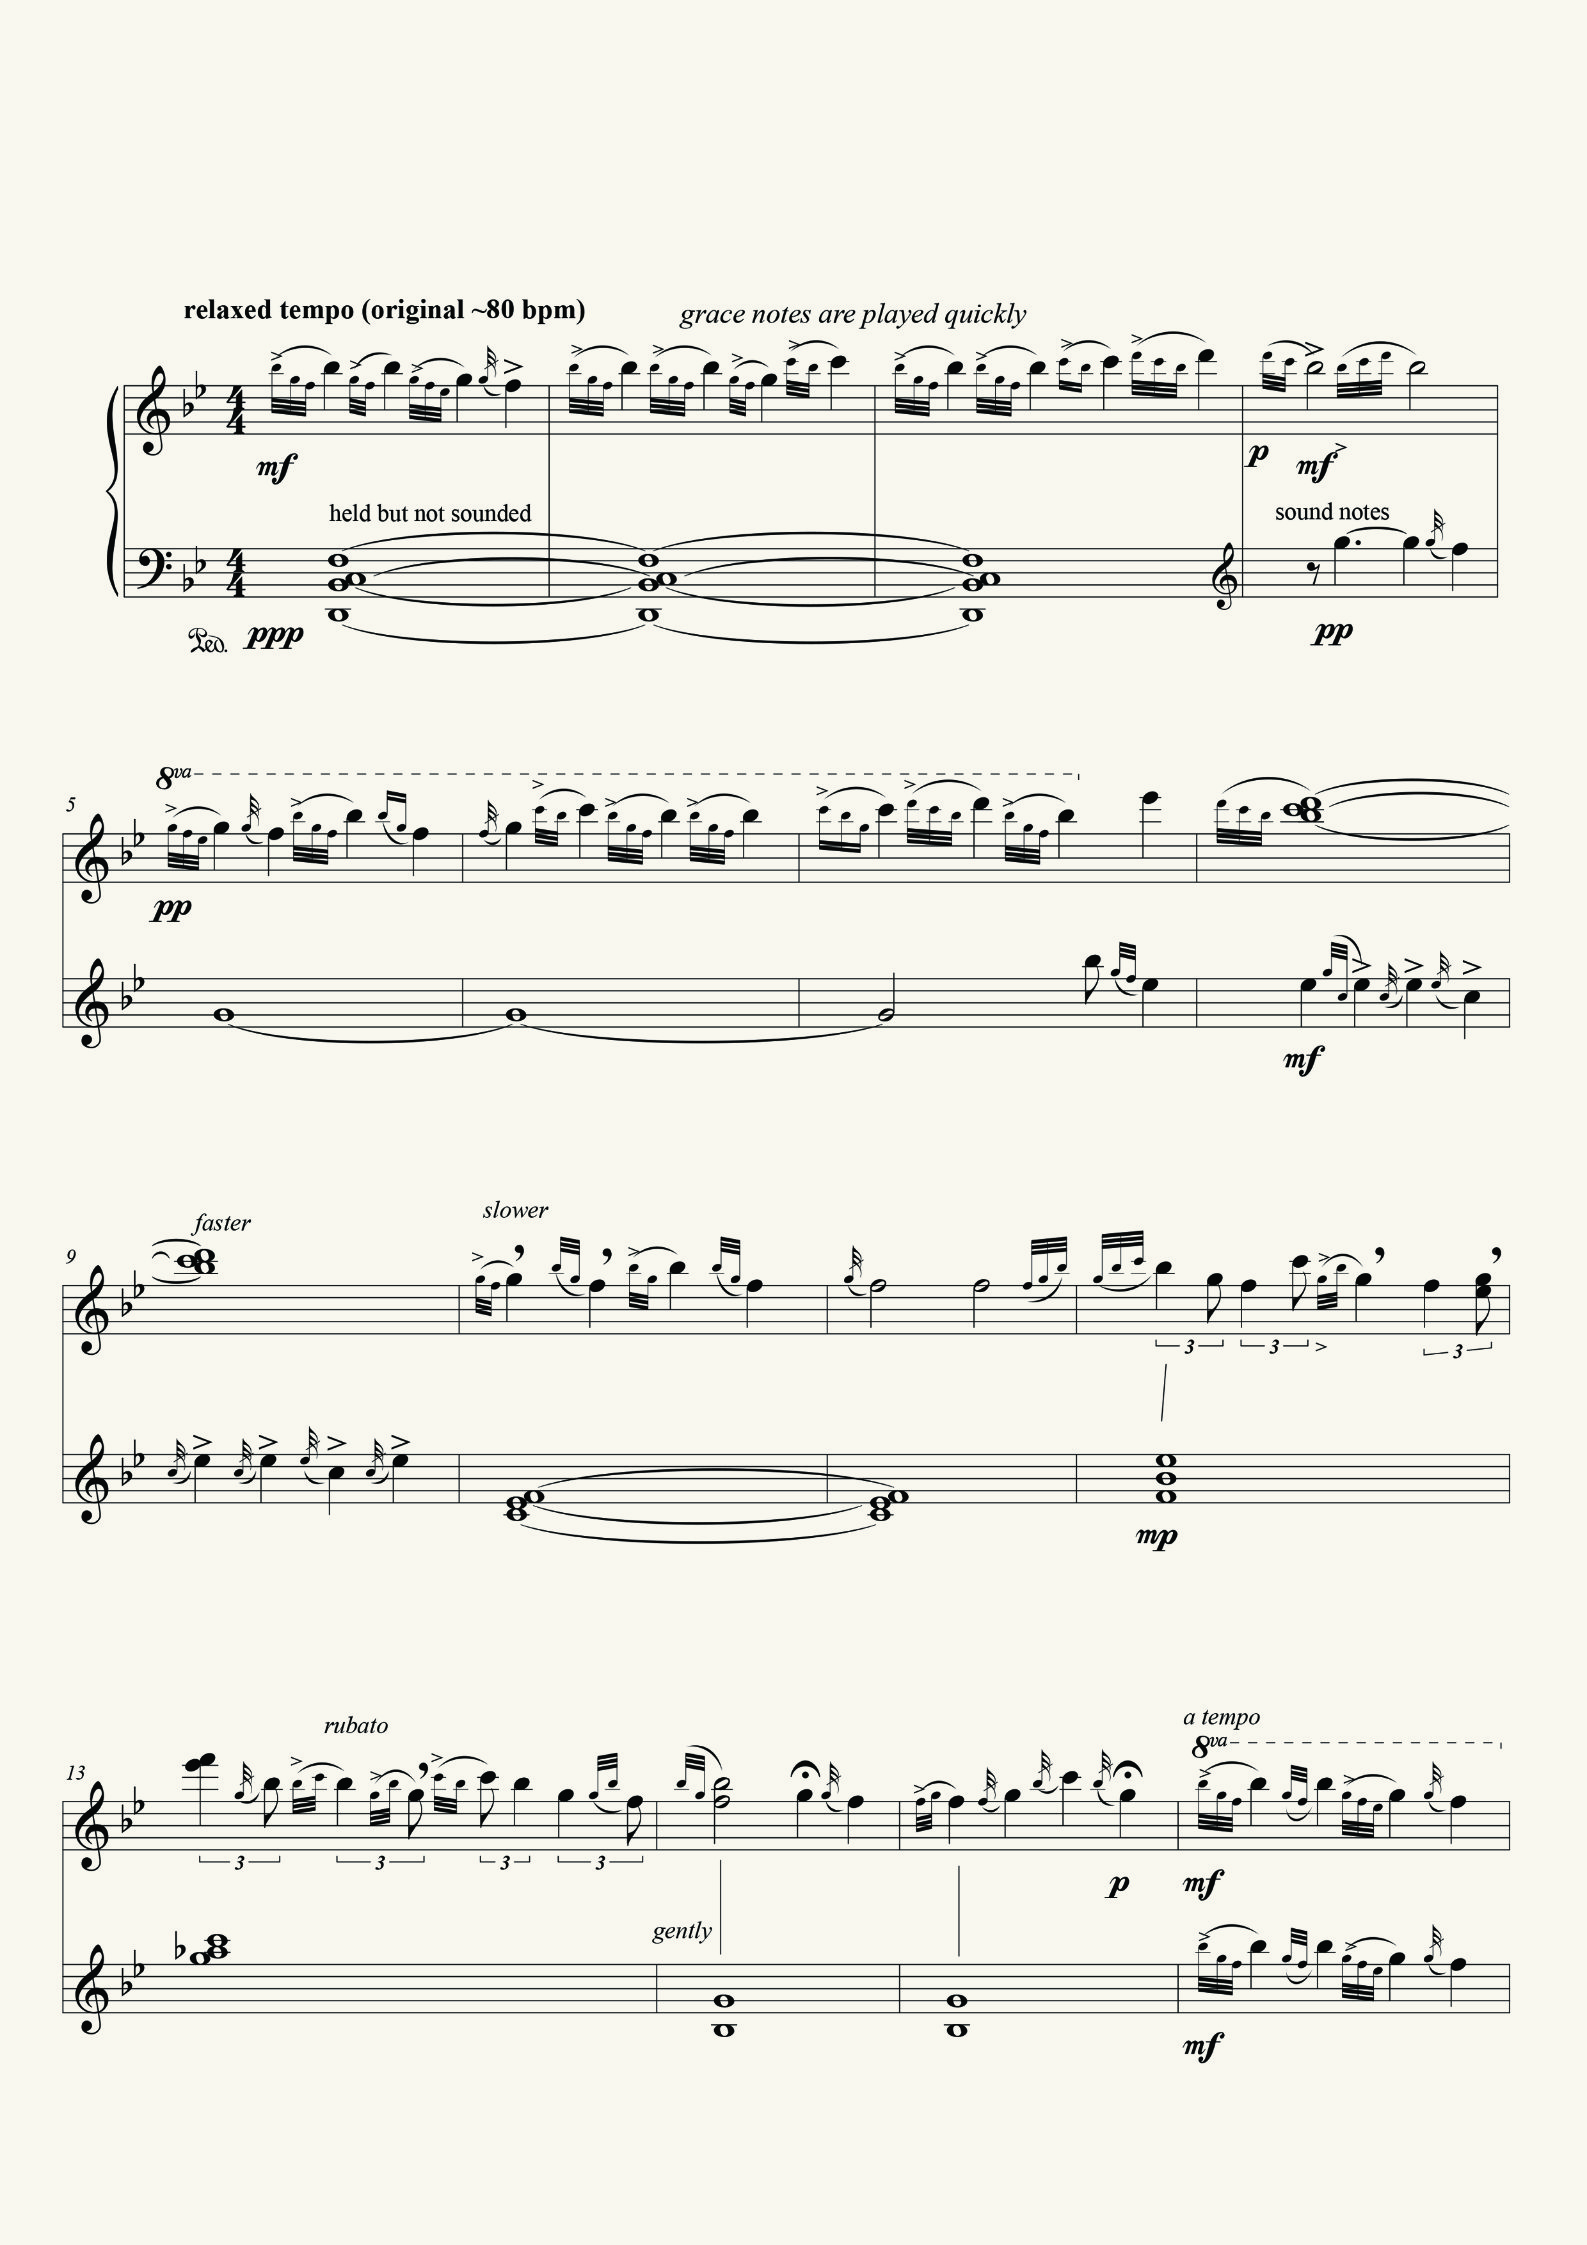 Score to “Phong’s Solo”, arranged by Dave Soldier with Richard Lair for piano, 2012. Based on an improvisation by Phong of the Thai Elephant Orchestra, transcribed by Wade Ripka. The original recording is on the album Elephonic Rhapsodies.